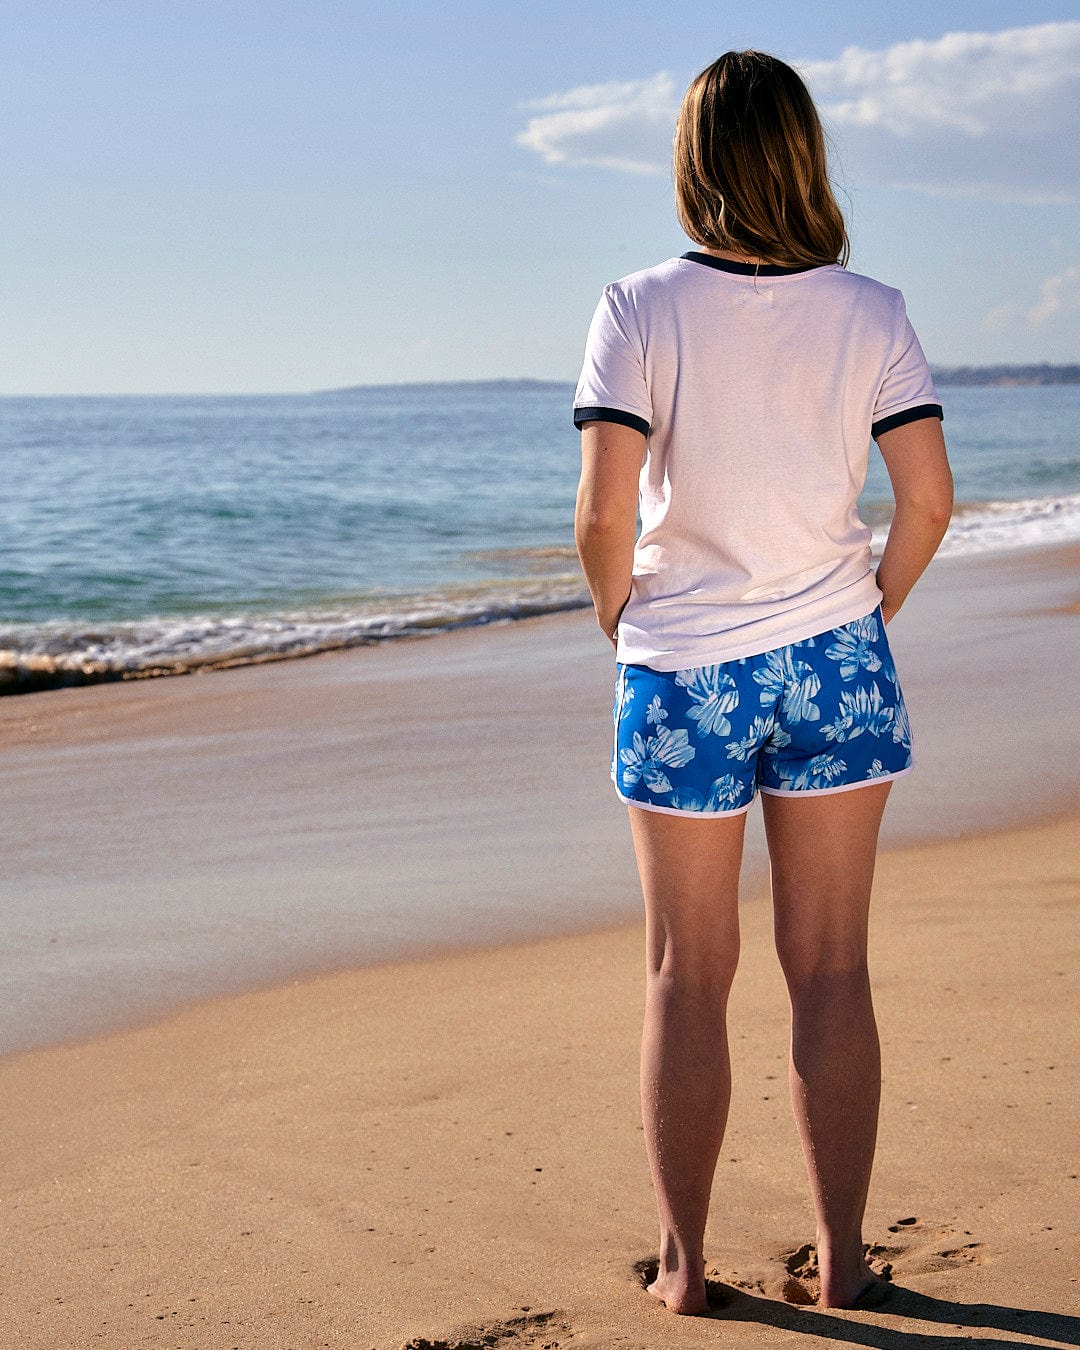 A woman is standing on the beach wearing a Saltrock Celeste Stripe - Womens Ringer Tee - White, gazing at the ocean.